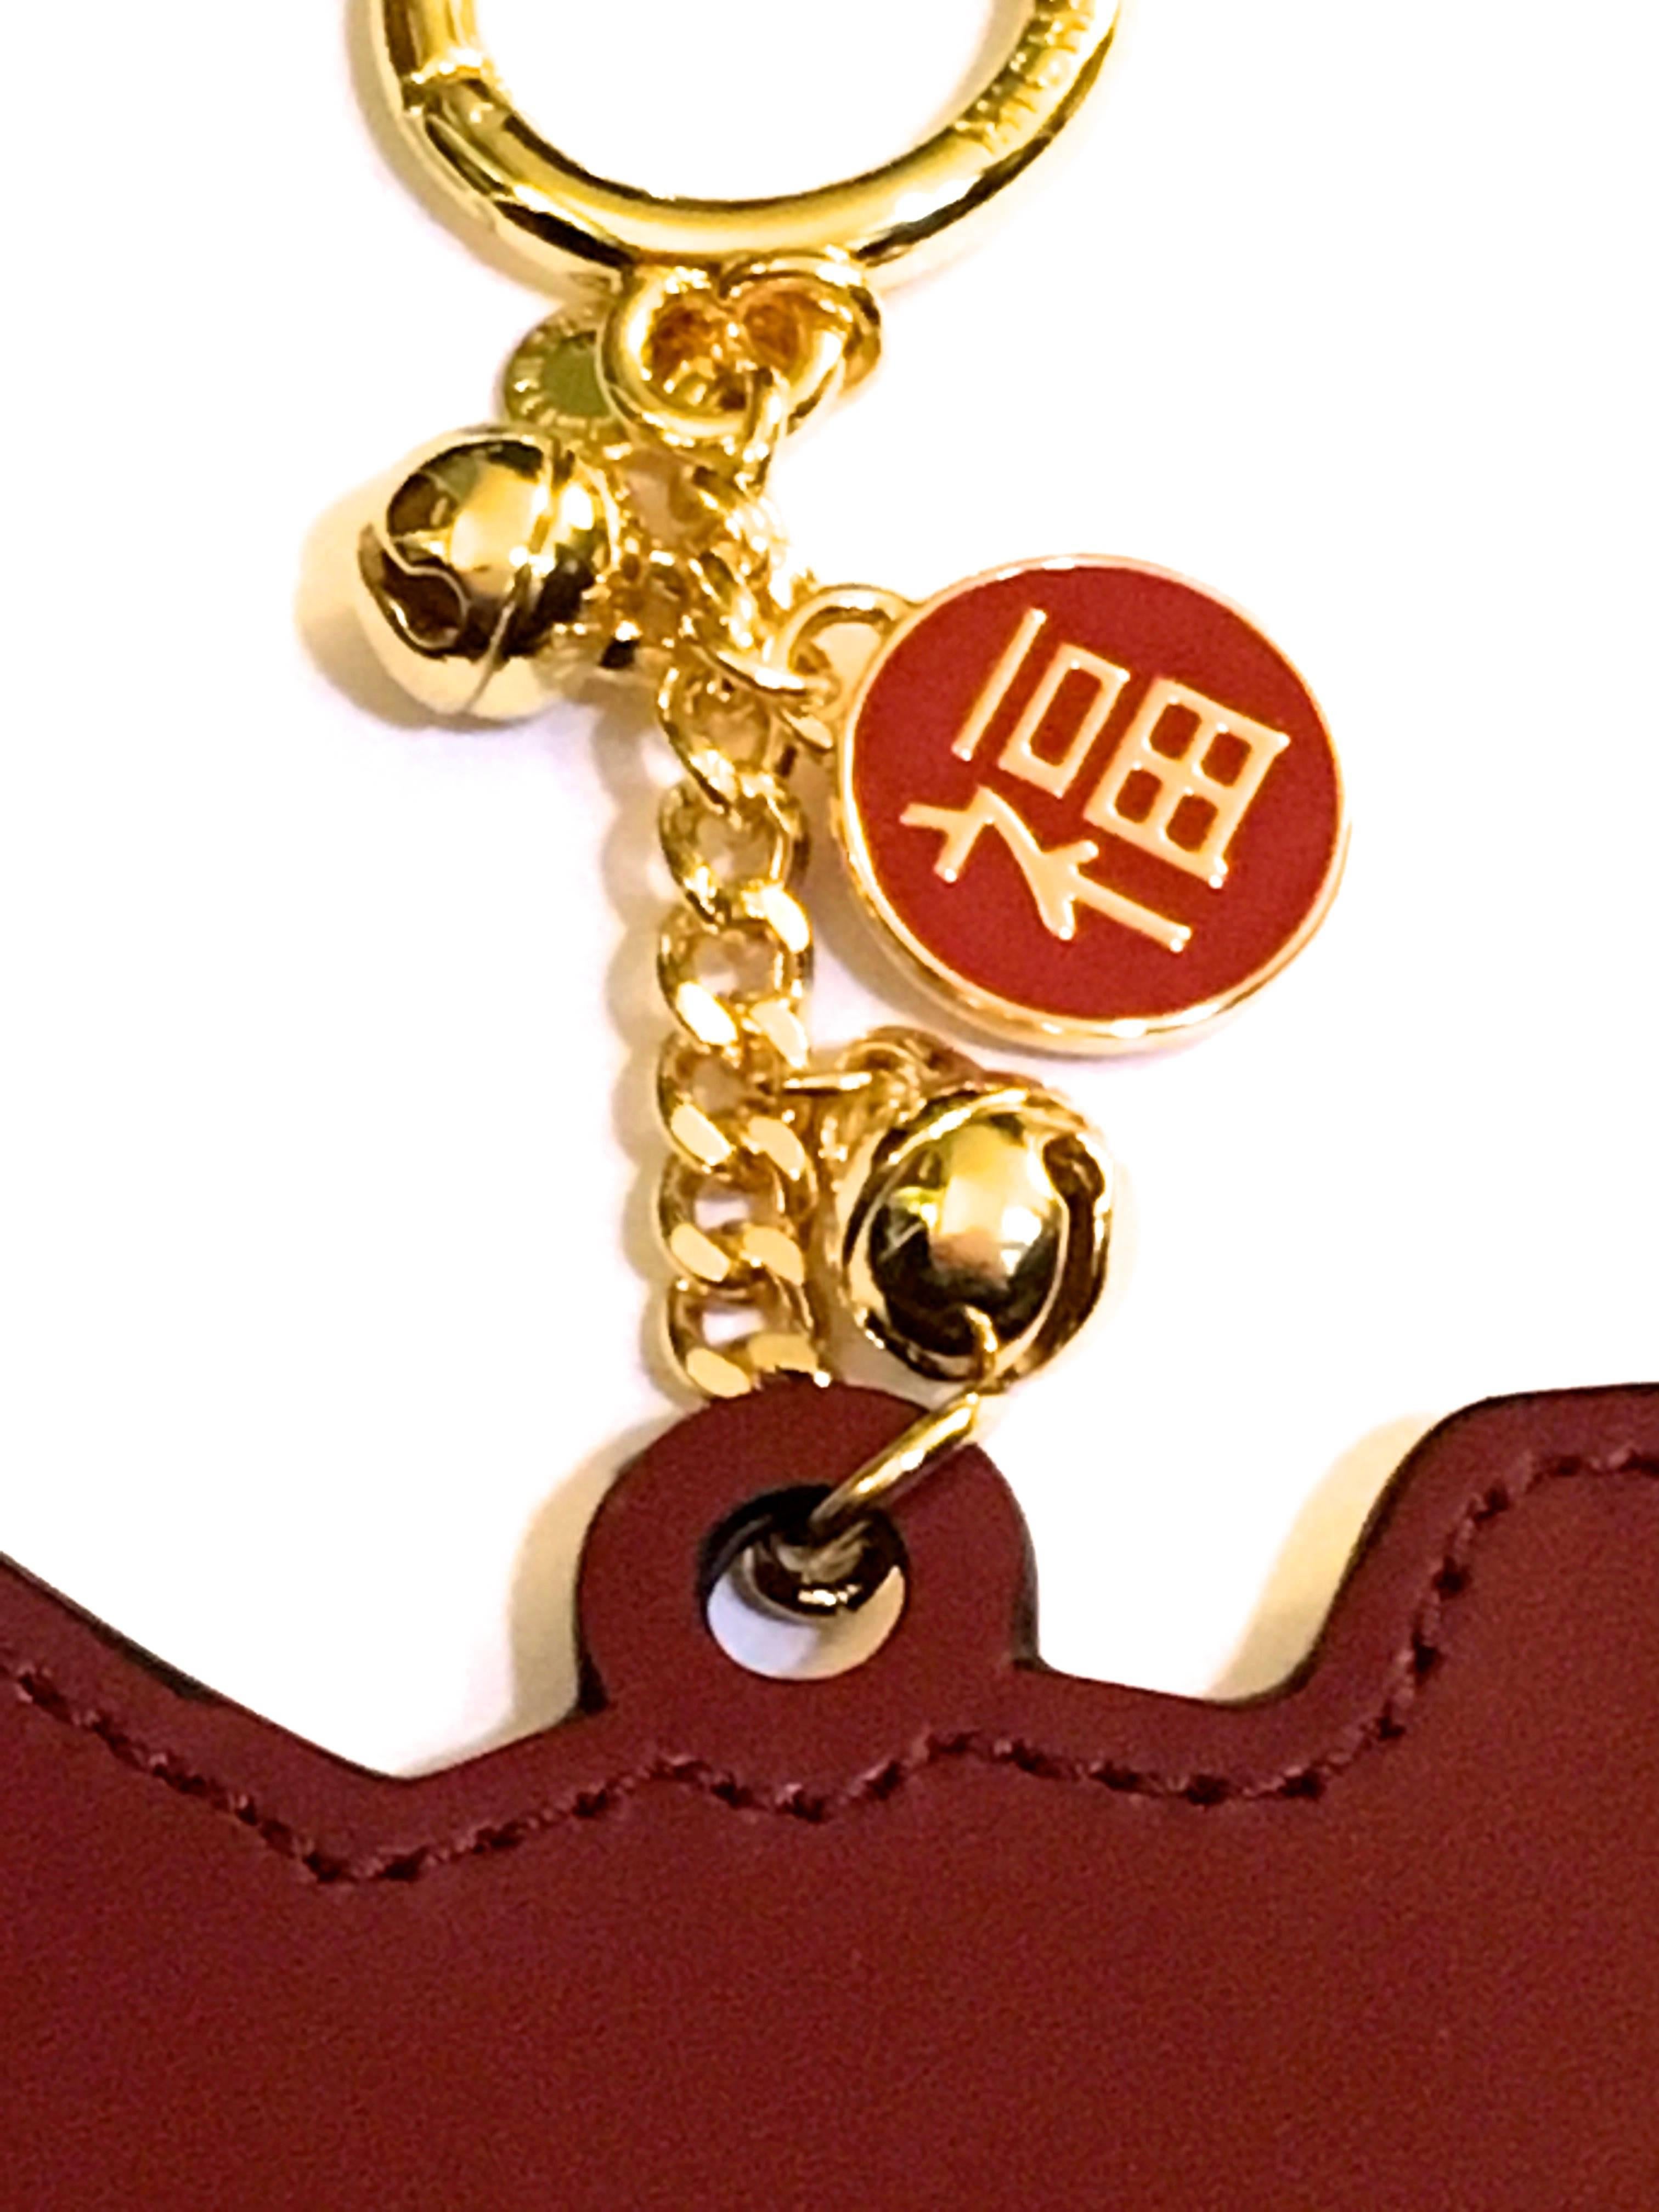 Women's or Men's Michael Kors Dog Bag Charm / Keychain - Chinese Astrology - Rare For Sale